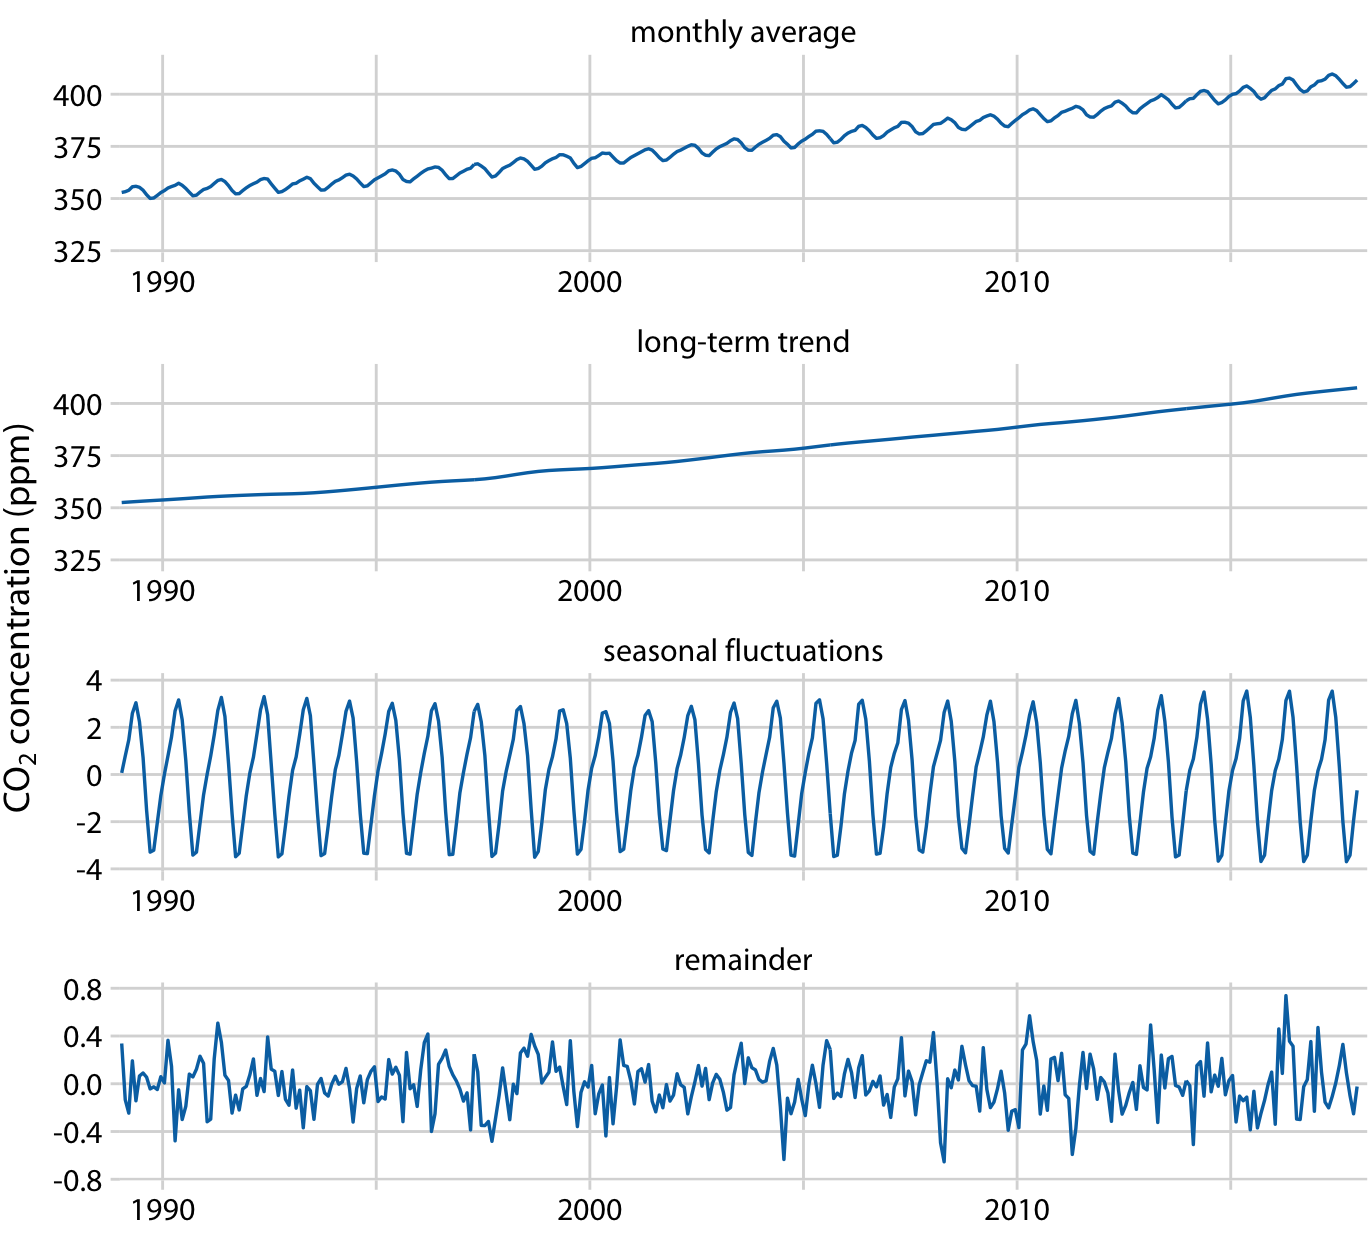 Time-series decomposition of the Keeling curve, showing the monthly average (as in Figure 14.12), the long-term trend, seasonal fluctuations, and the remainder. The remainder is the difference between the actual readings and the sum of the long-term trend and the seasonal fluctuations, and it represents random noise. I have zoomed into the most recent 30 years of data to more clearly show the shape of the annual fluctuations. Data source: Dr. Pieter Tans, NOAA/ESRL, and Dr. Ralph Keeling, Scripps Institution of Oceanography